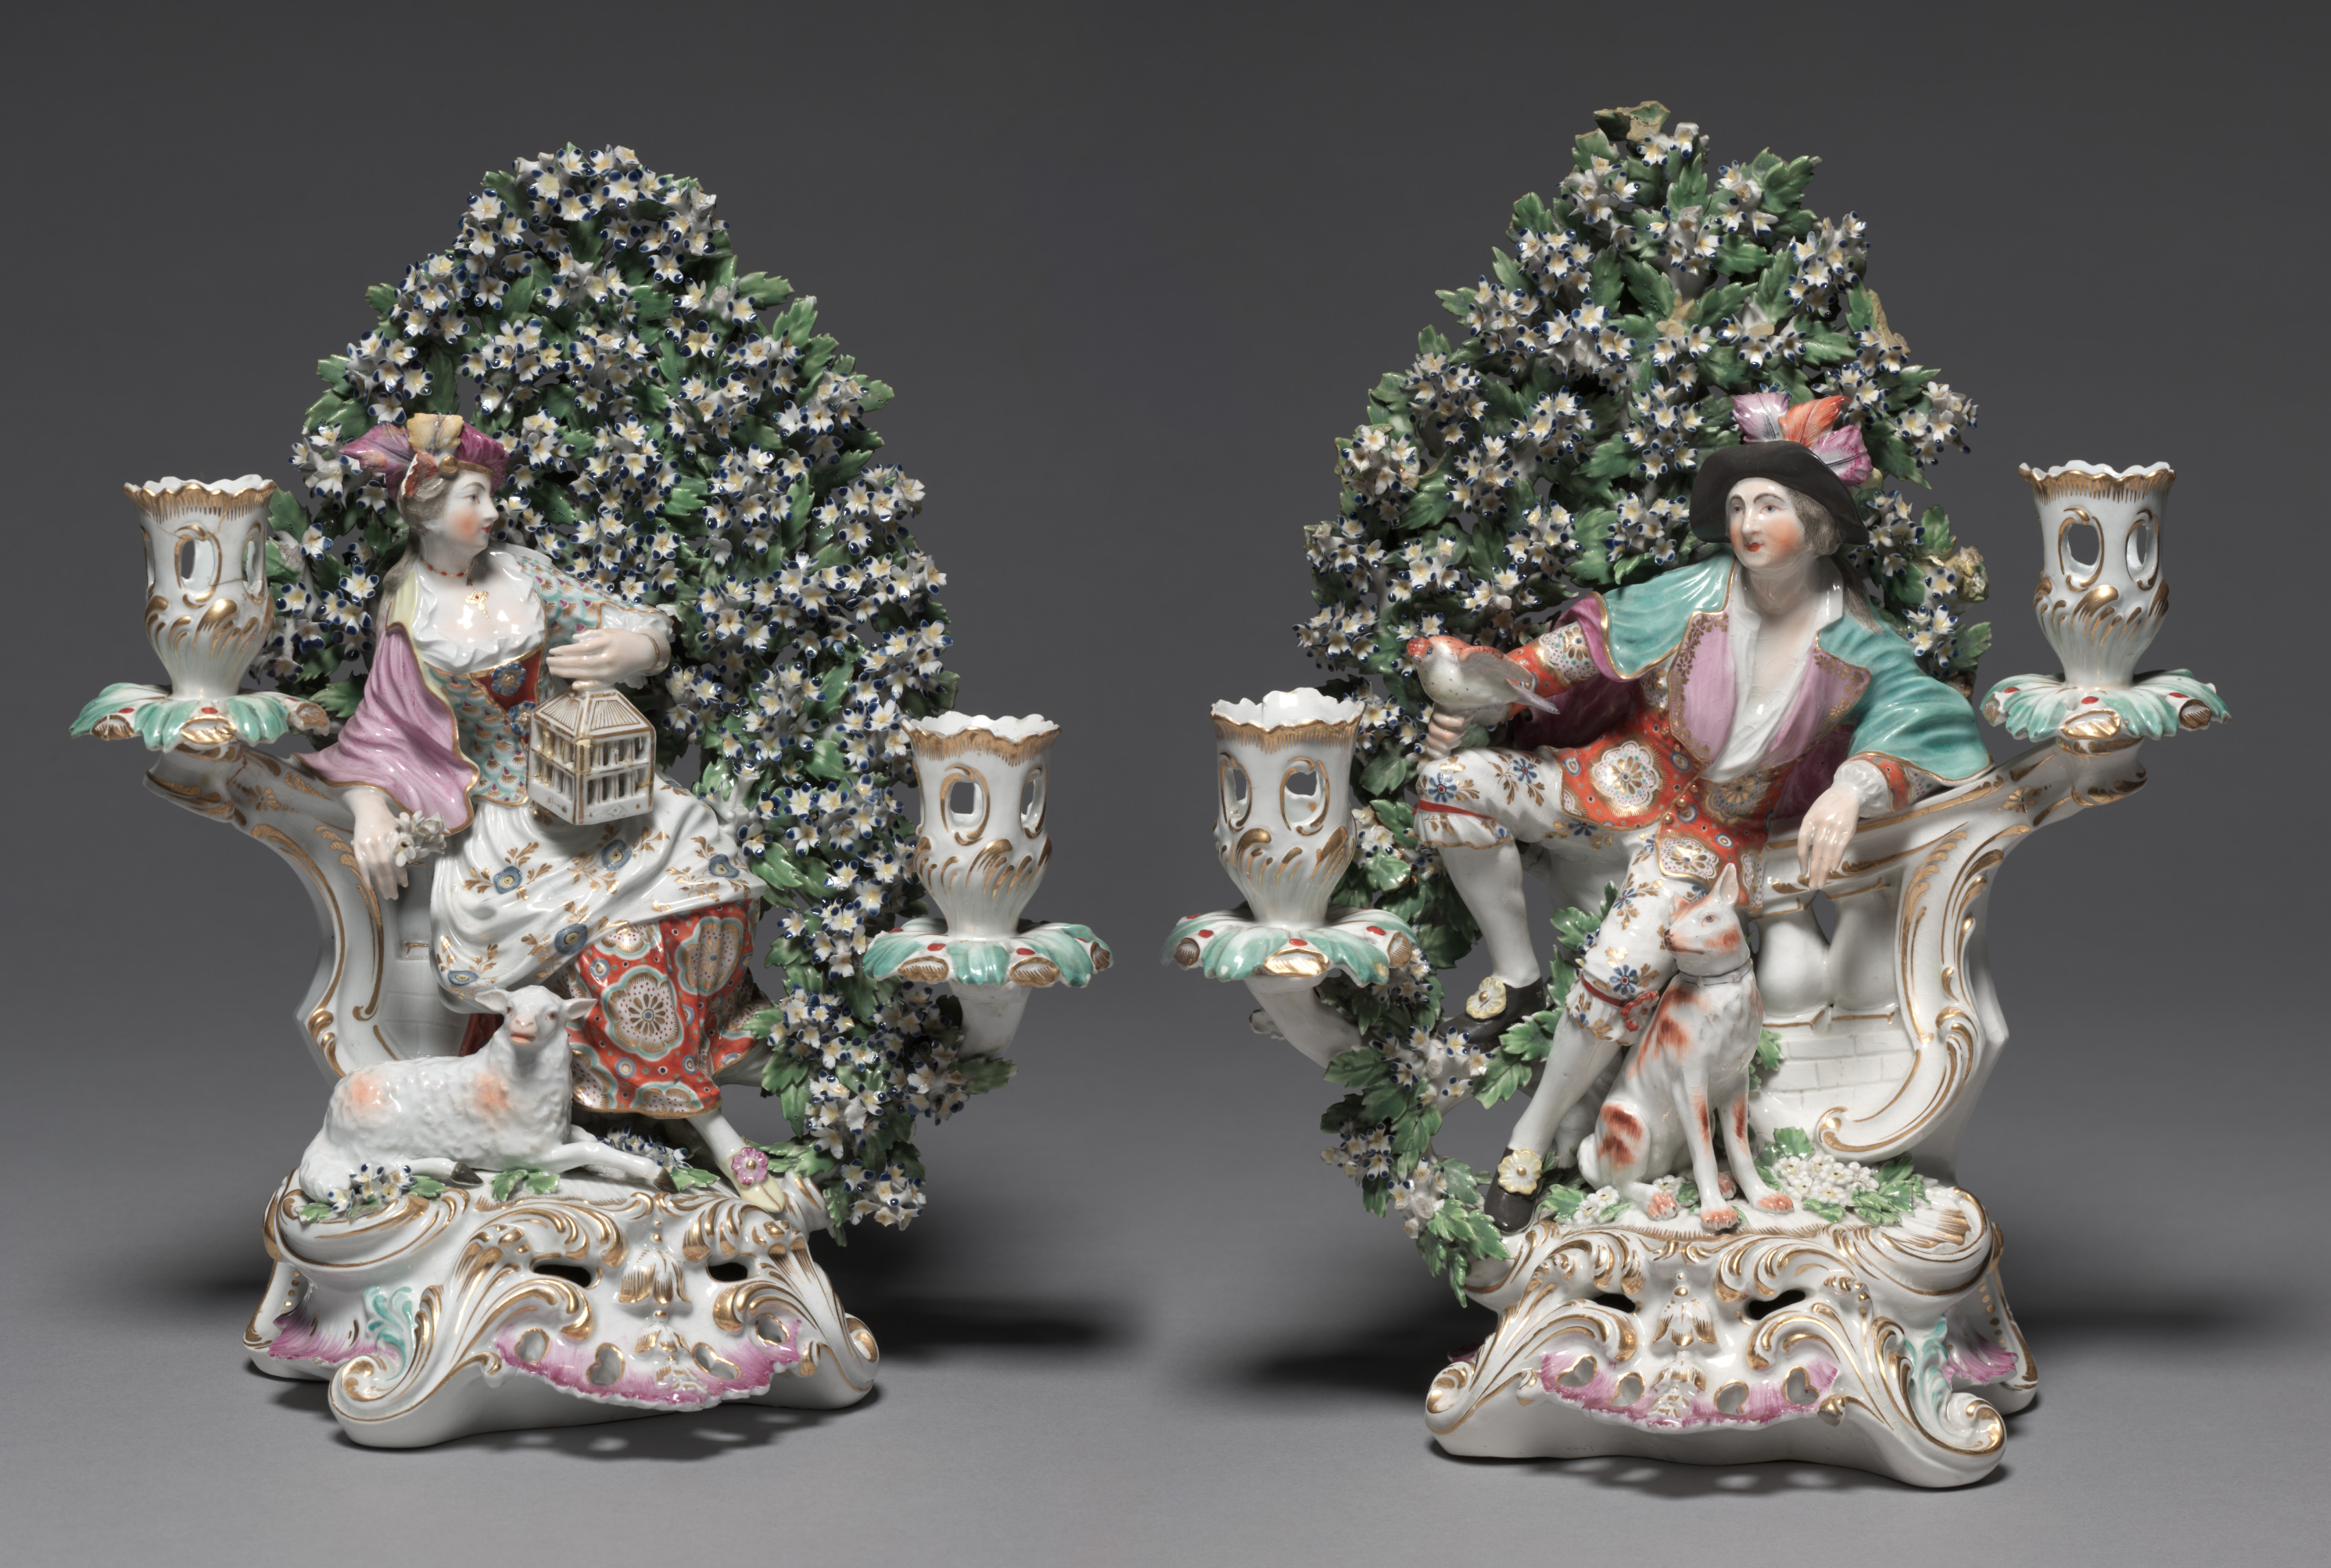 Pair of Candelabra Depicting Allegorical Figures of Liberty and Matrimony